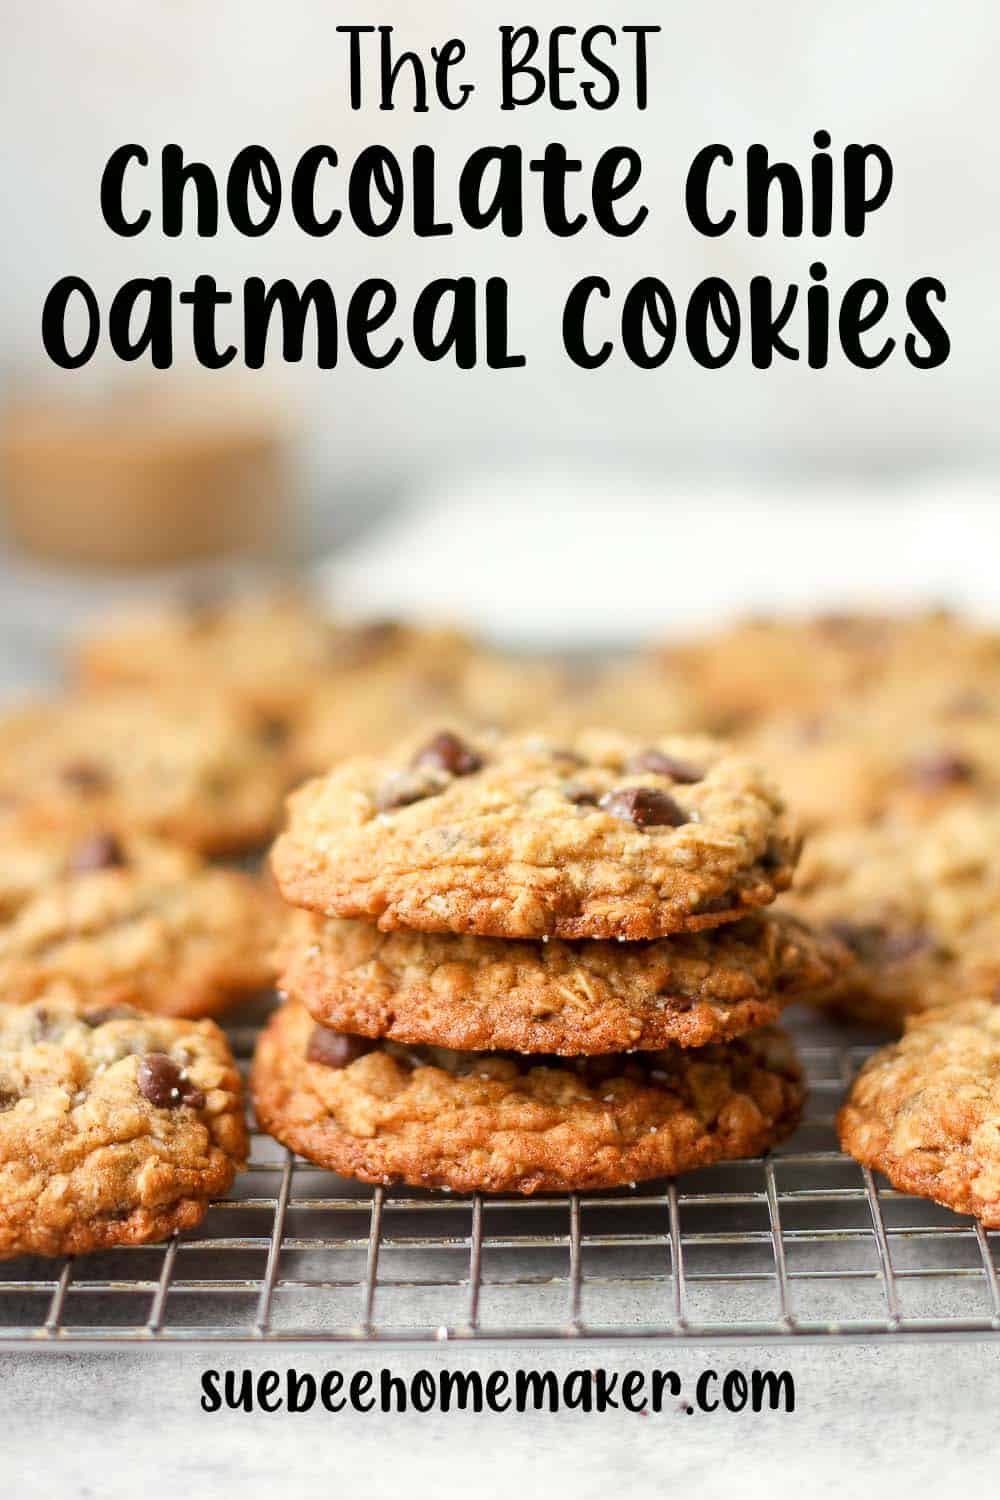 Some stacked chocolate chip oatmeal cookies on a rack.